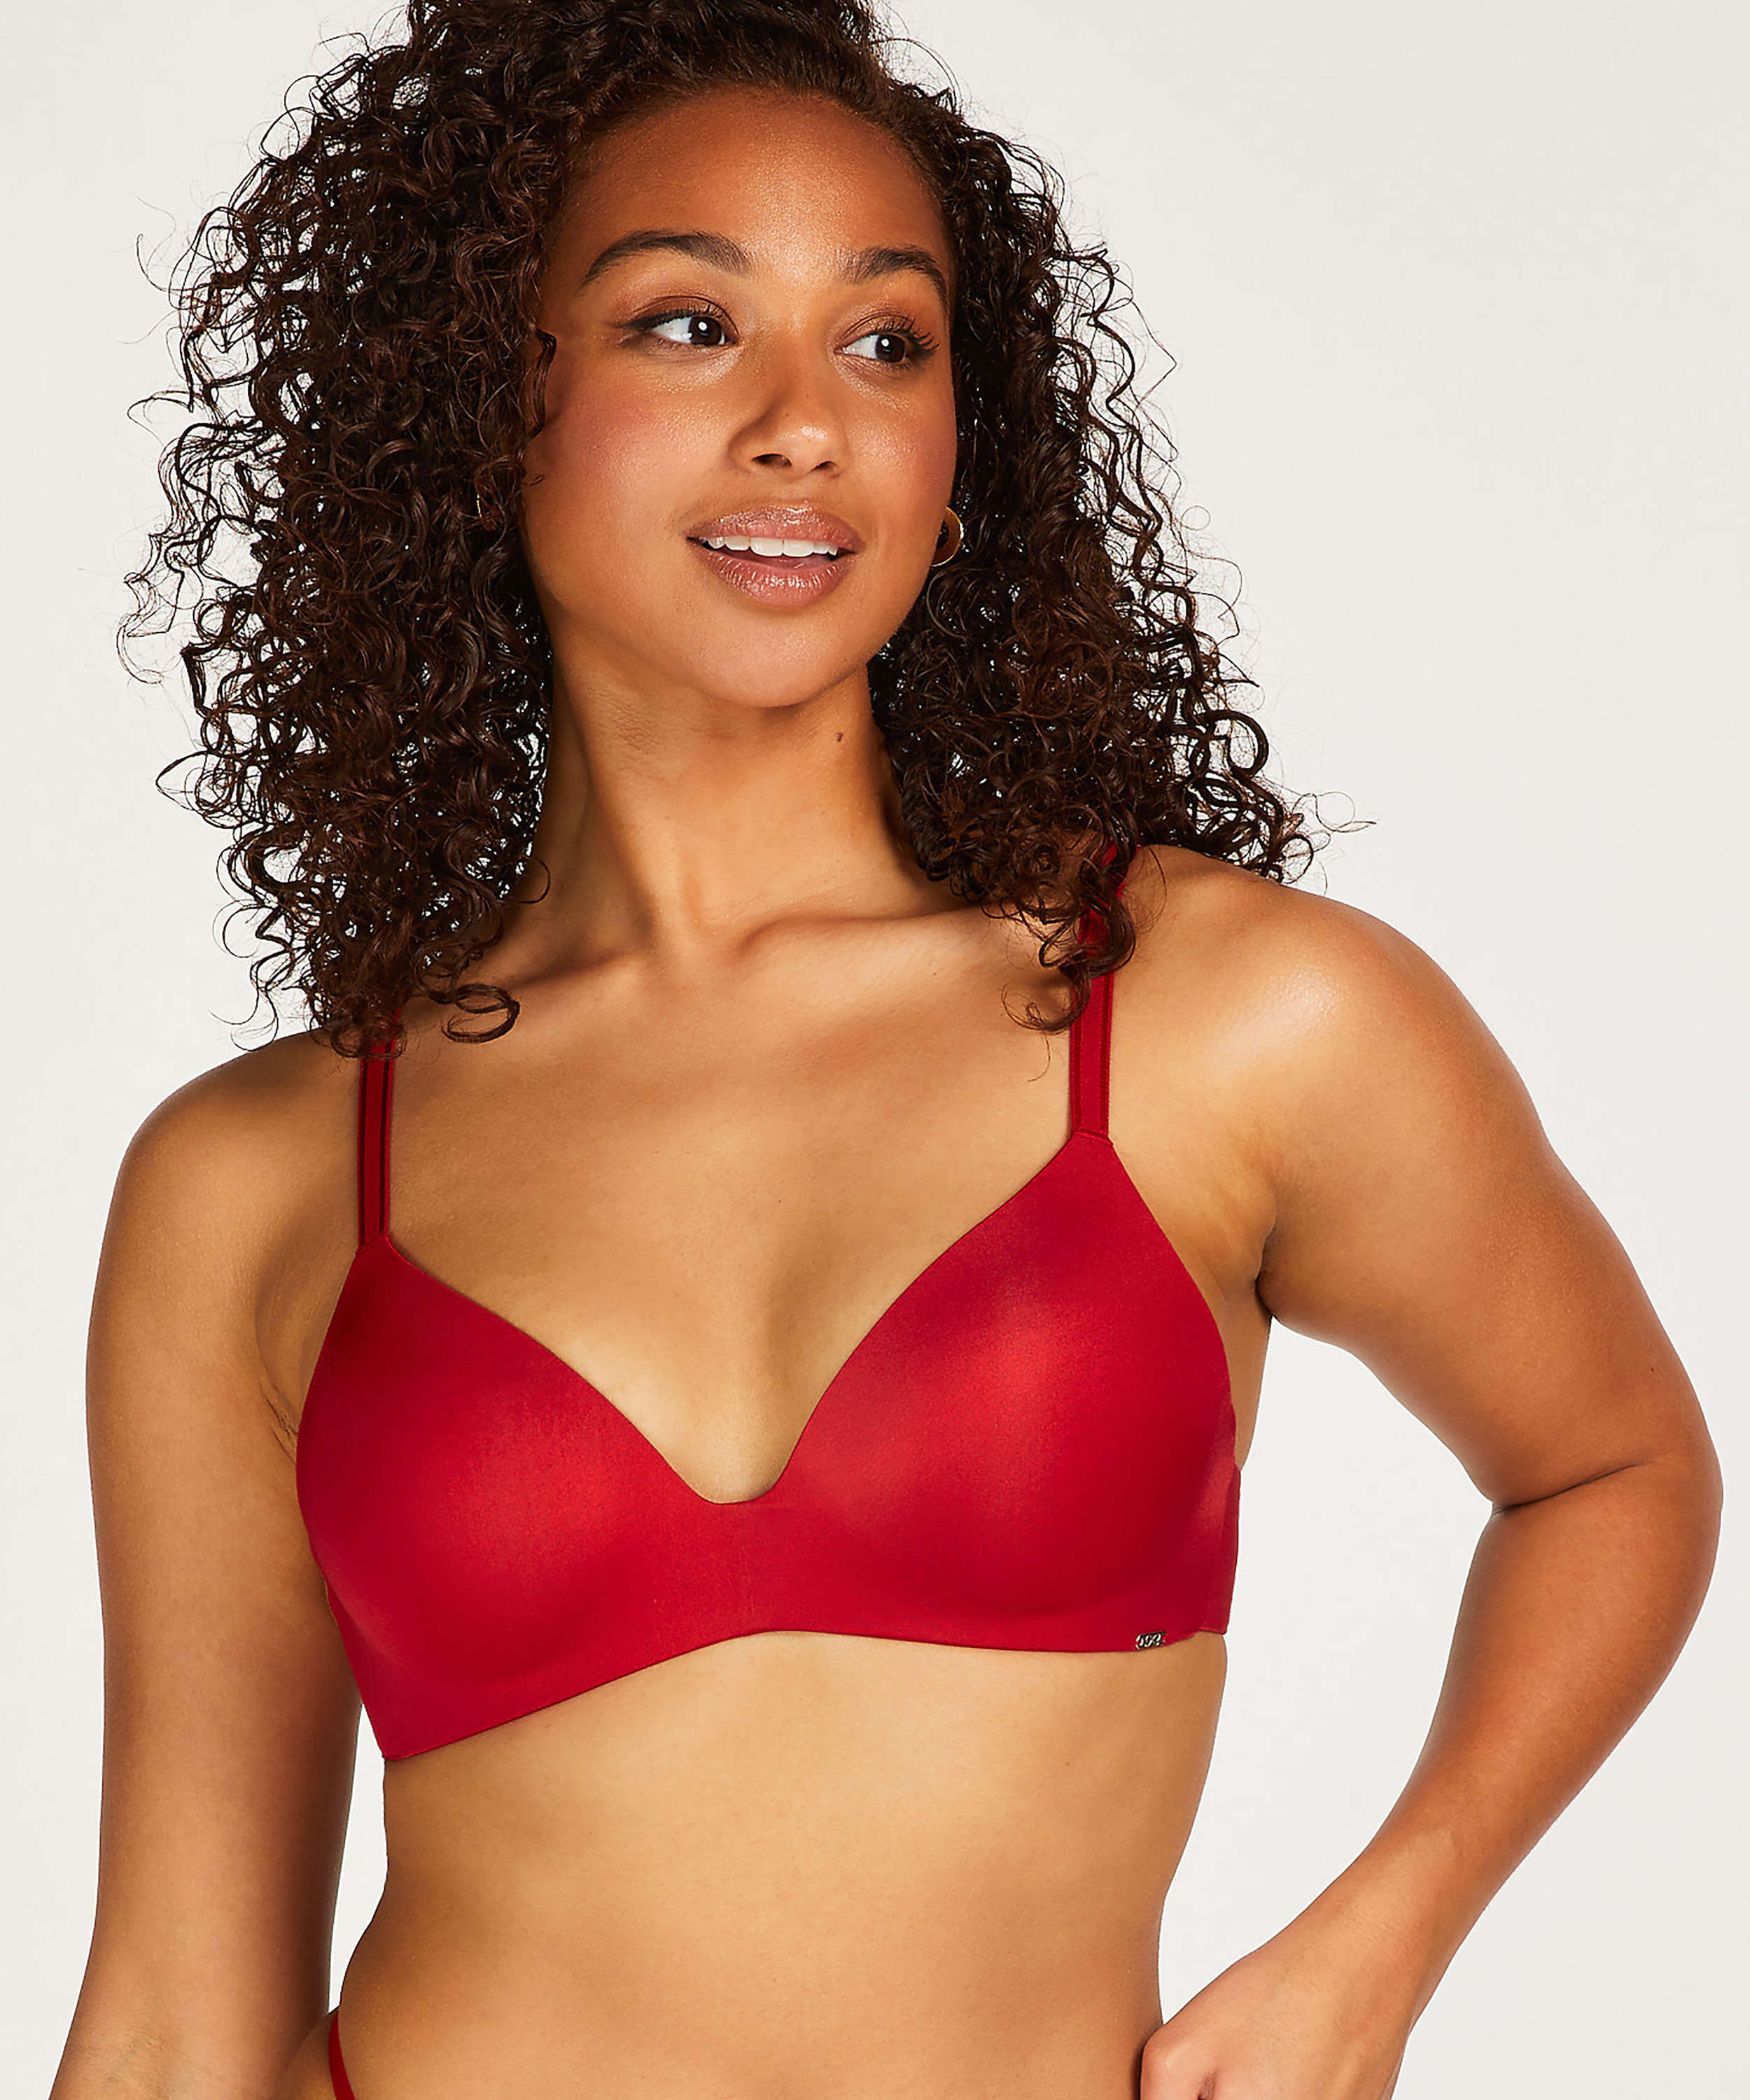 Mona Padded Non-Underwired push-up Bra for £10 - Plus Size Bras